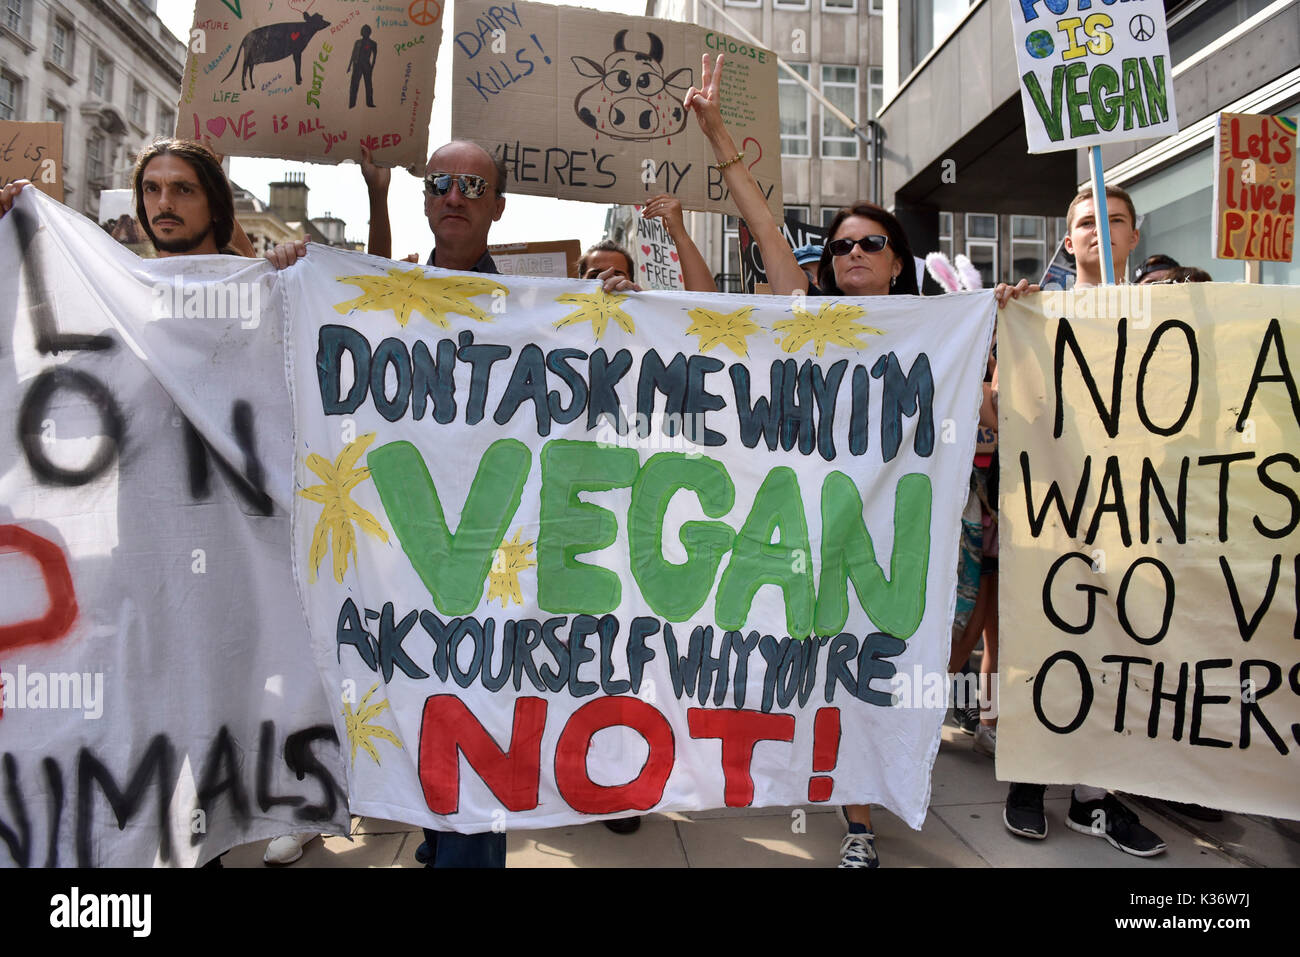 London, UK.  2 September 2017.  Vegans and other demonstrators take part in an Animal Rights march from Hyde Park Corner to Parliament Square demanding an end to animal oppression in order to help the planet.   Credit: Stephen Chung / Alamy Live News Stock Photo